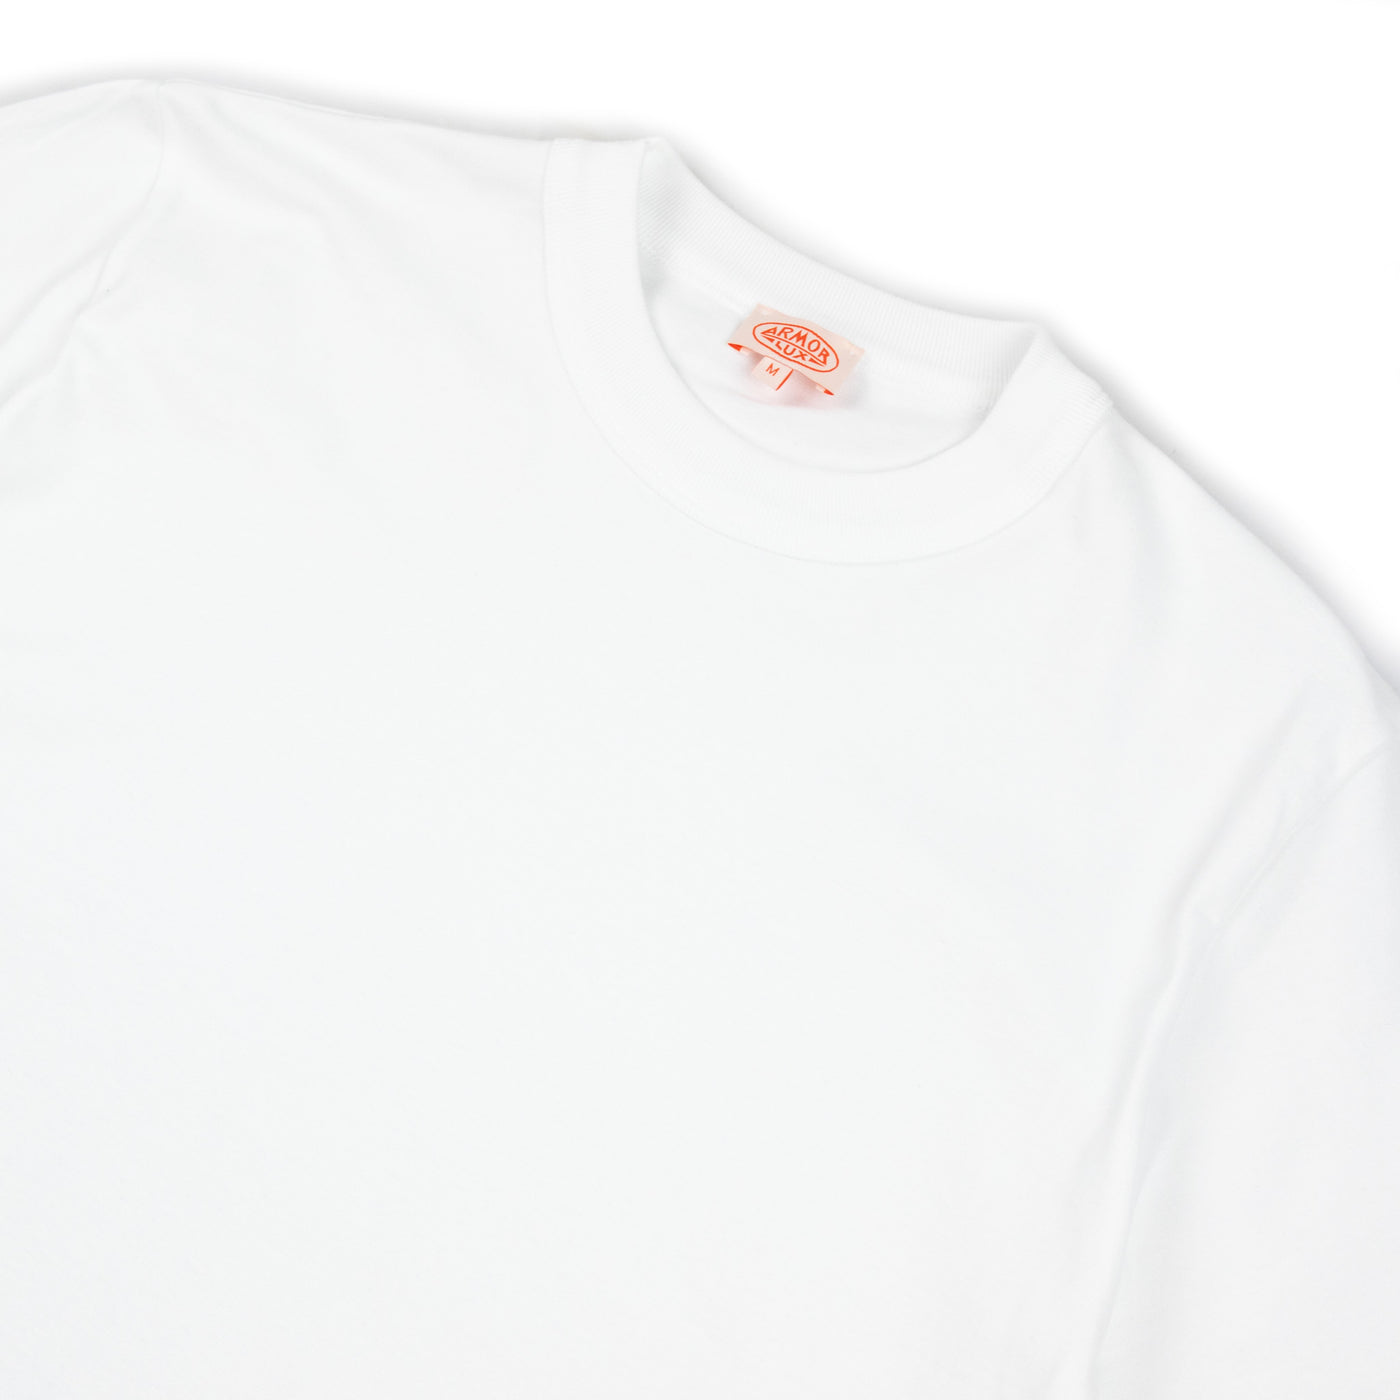 Armor-Lux Heritage 70990 Callac T-Shirt Blanc White Chest